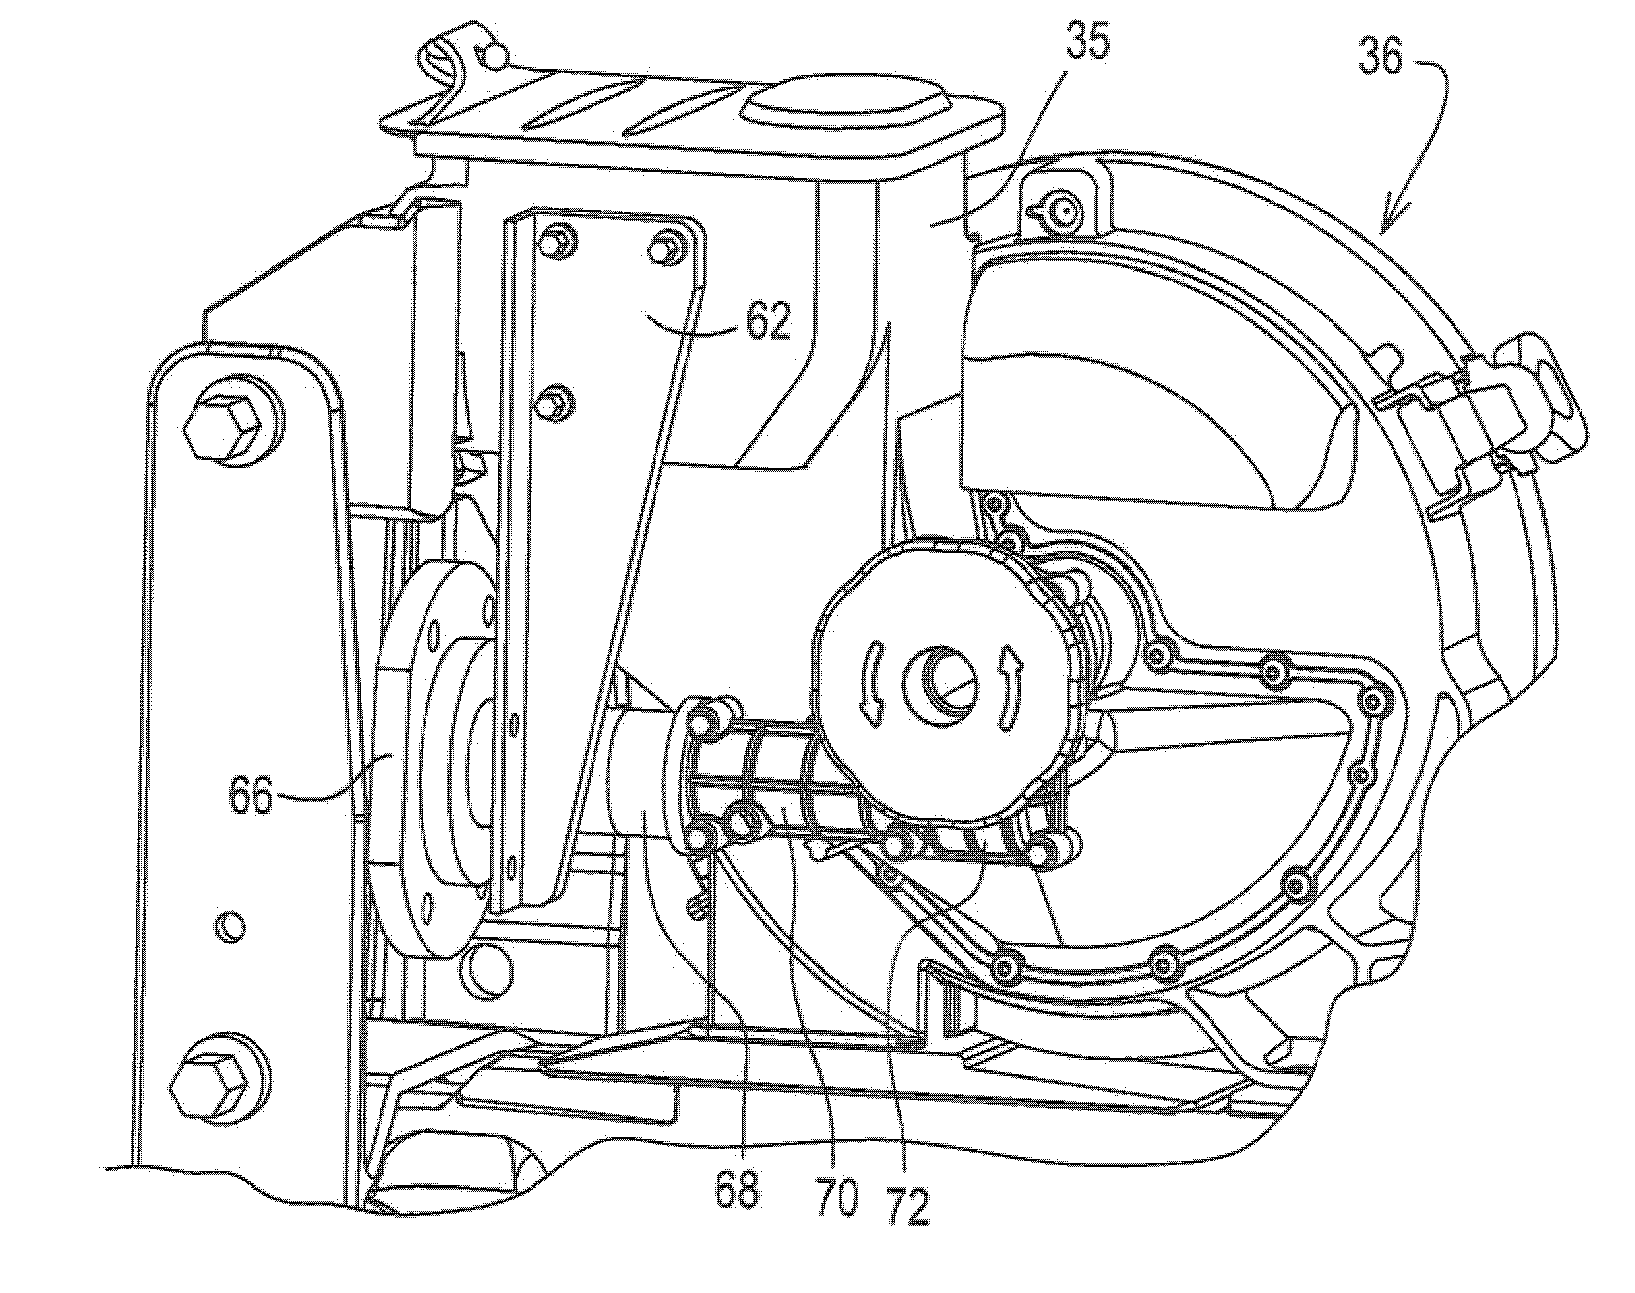 Planter and method of operating a planter with individual meter control